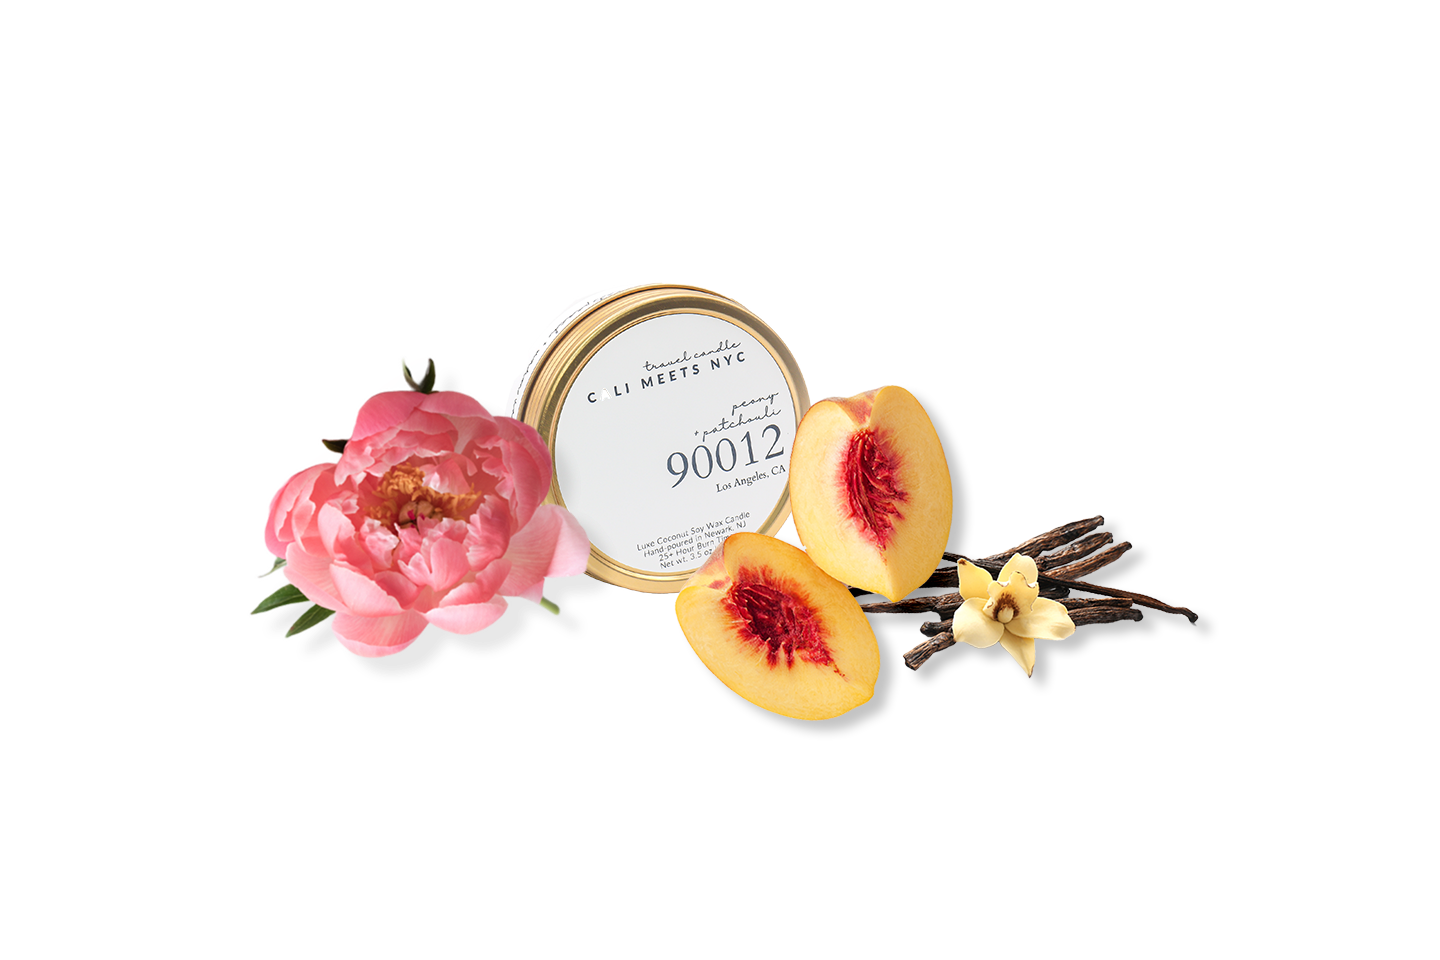 Cali Meets NYC 90012, Peony + Patchouli Coconut Soy Candle Tin2